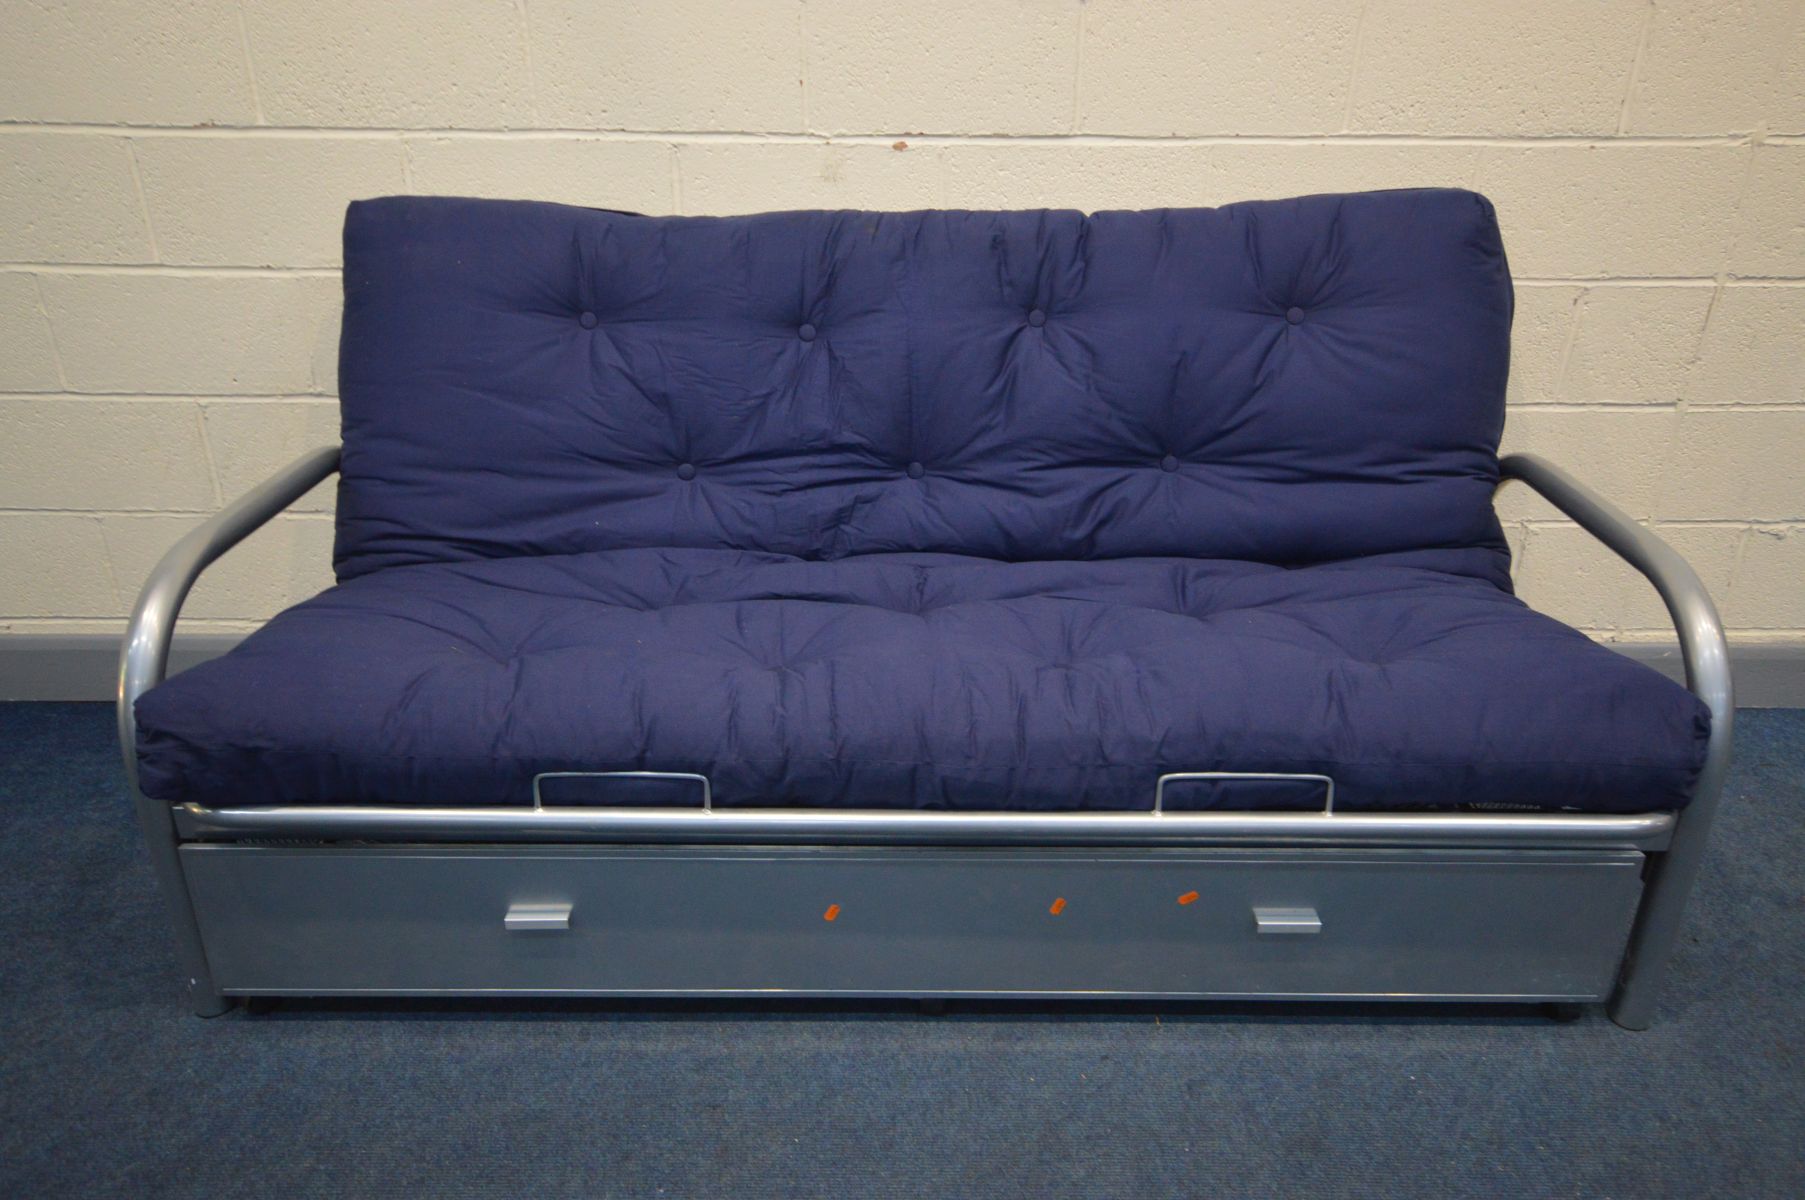 A METAL FRAMED BED SETTEE, with a separate blue cushions and one long drawer